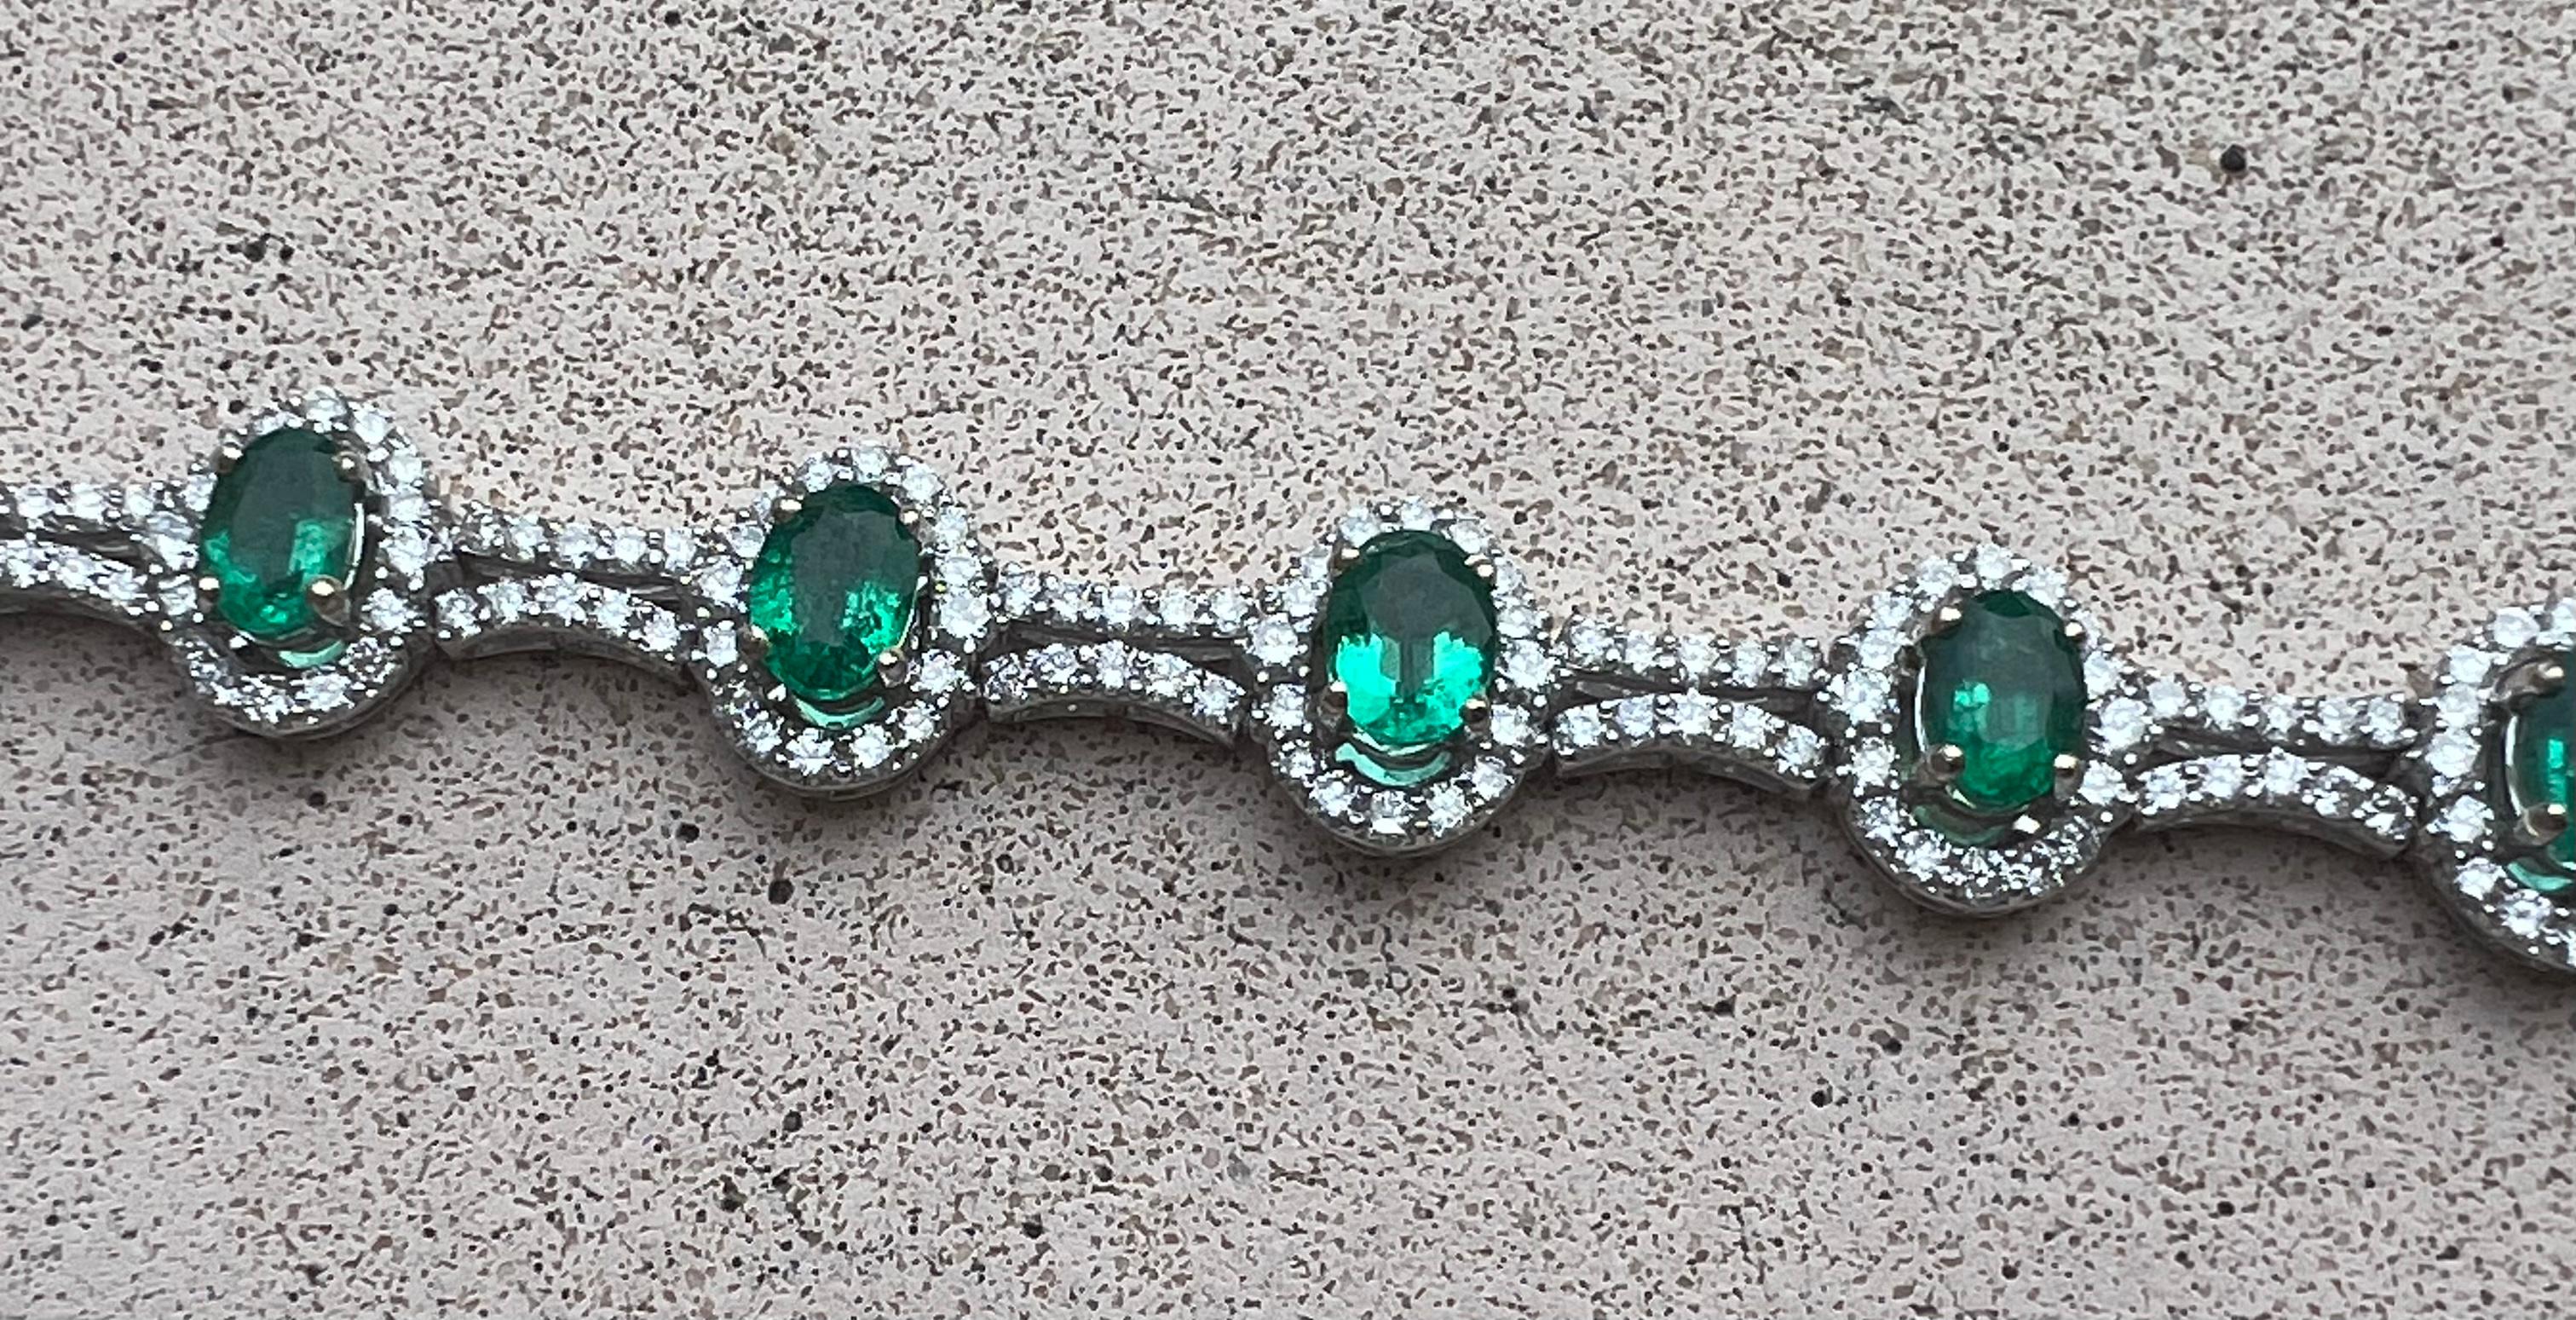 Very exquisite, estate 15.80 carat emerald and diamond 18 karat white gold tennis or line bracelet features 10 beautifully matched, oval cut emeralds mounted in 4 prong stations, surrounded by a halo of the most sparkling round brilliant diamonds